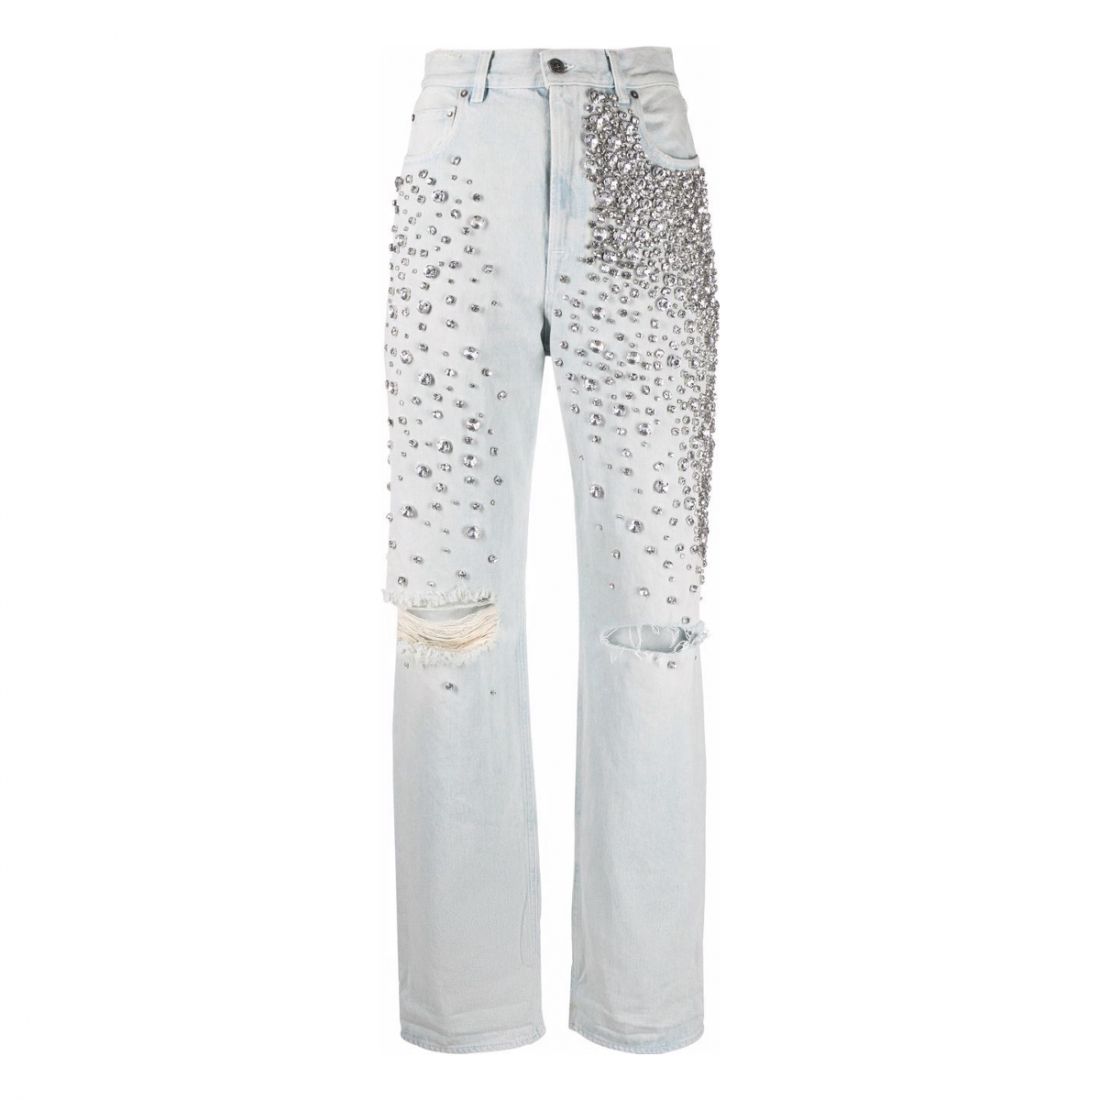 Golden Goose Deluxe Brand - Jeans 'Kim Crystal Bleached' pour Femmes